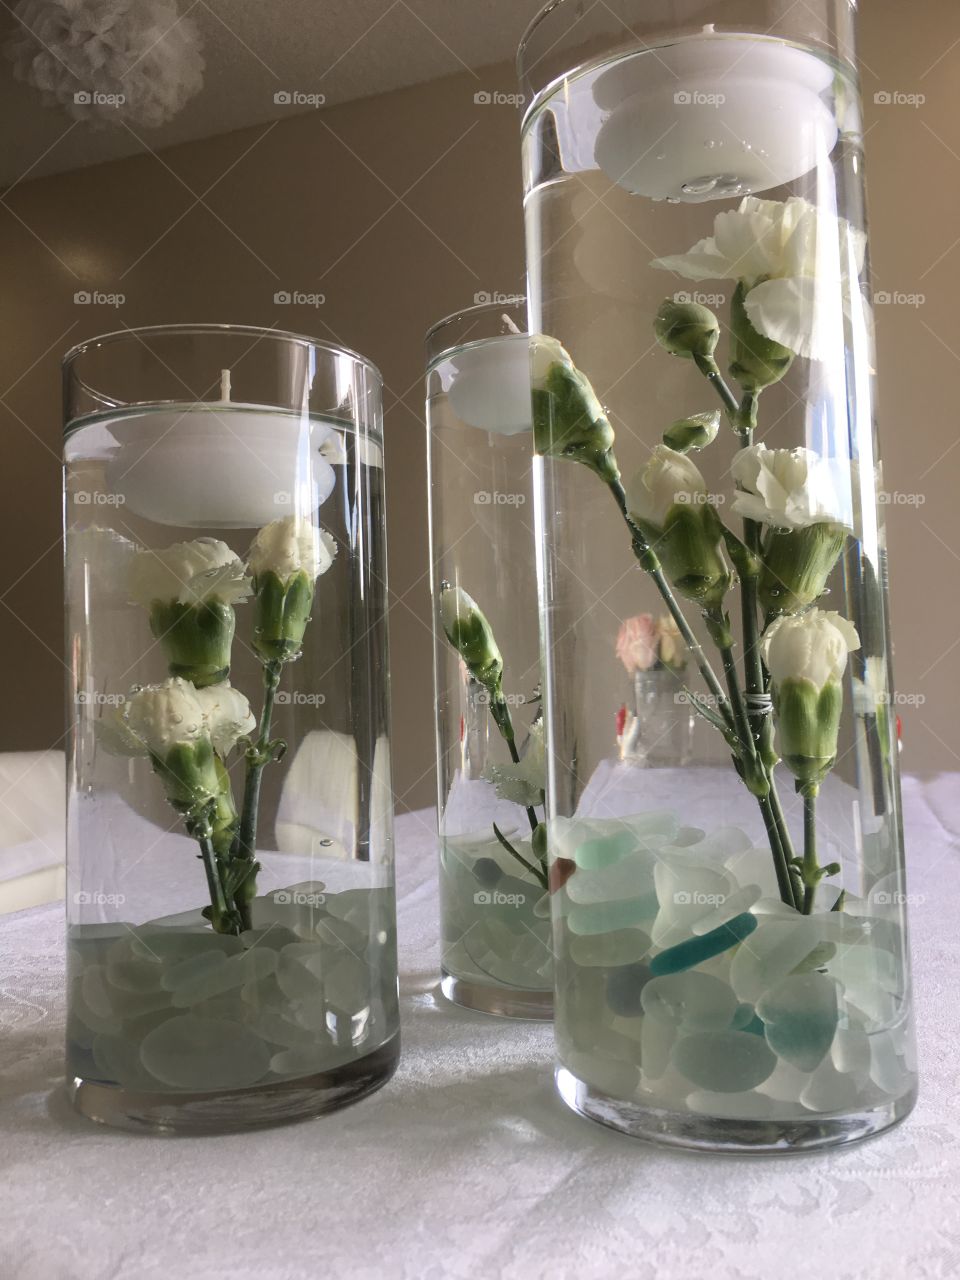 Close up of the beautiful white flowers and candles in water used as wedding decorations. The base of the vase is filled with mainly clear beach glass found while on vacation in Jamaica 